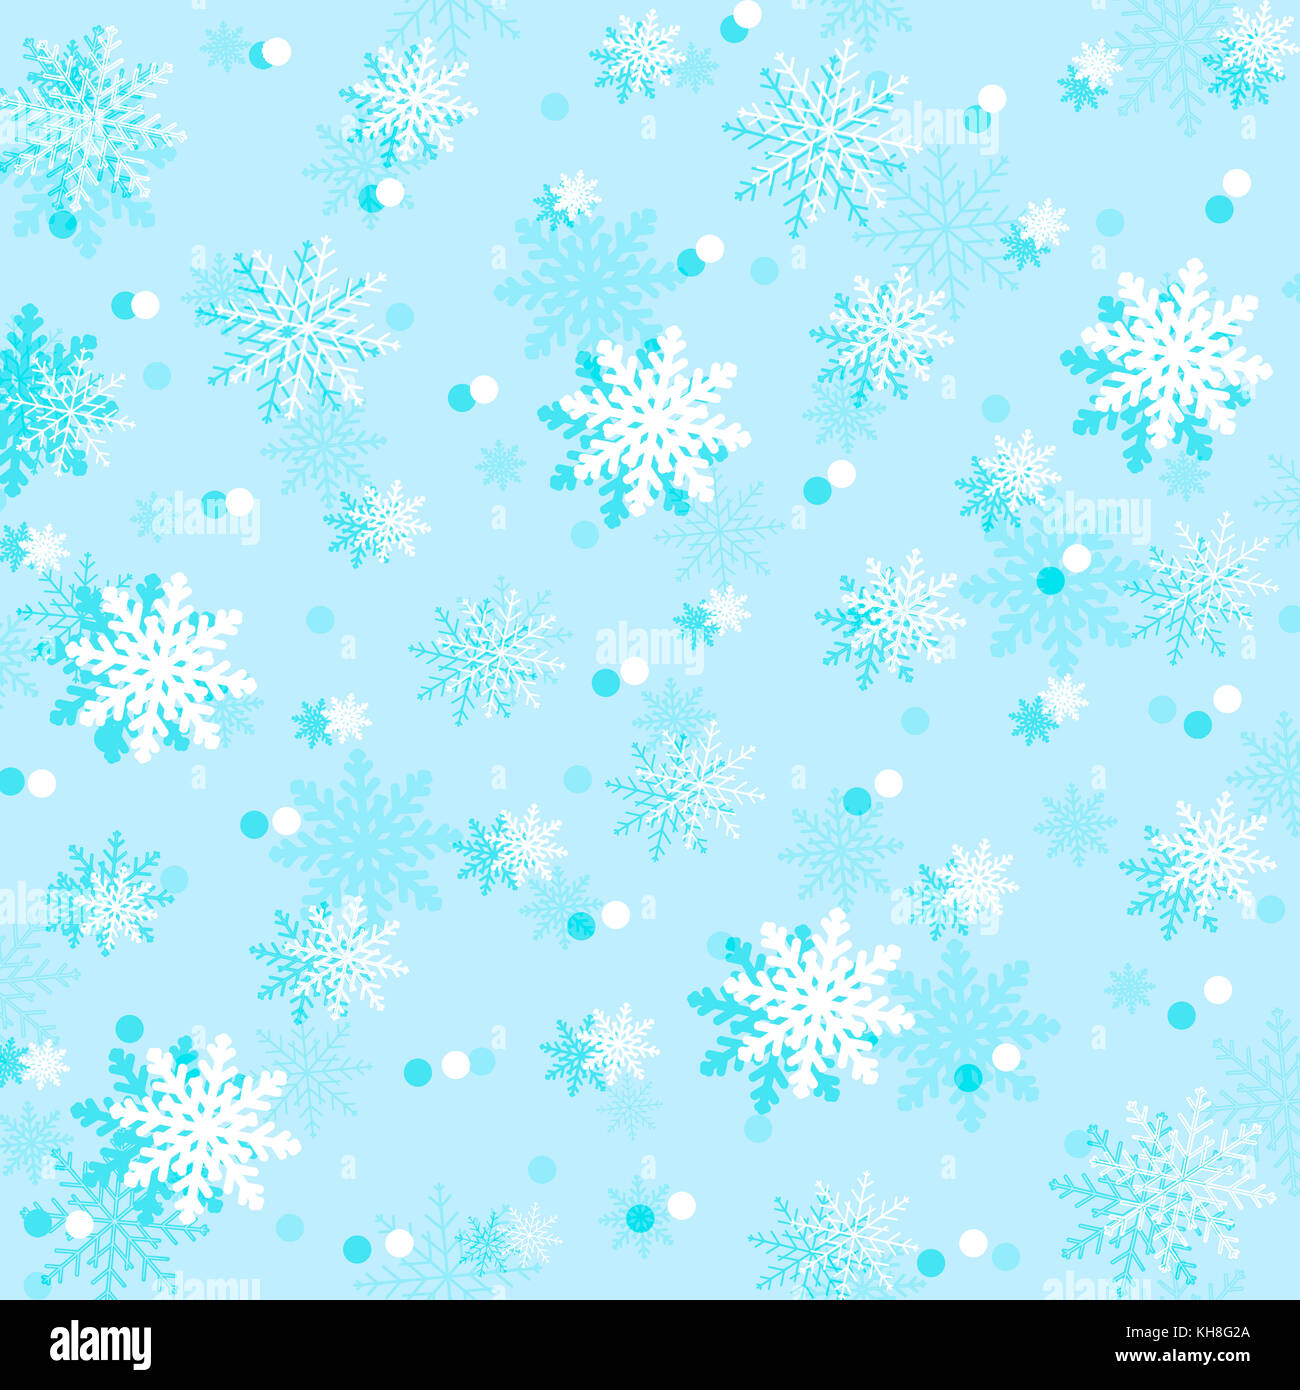 Snow cover. Simple vector white snowflakes on a blue background. Winter illustration of snow. Stock Photo